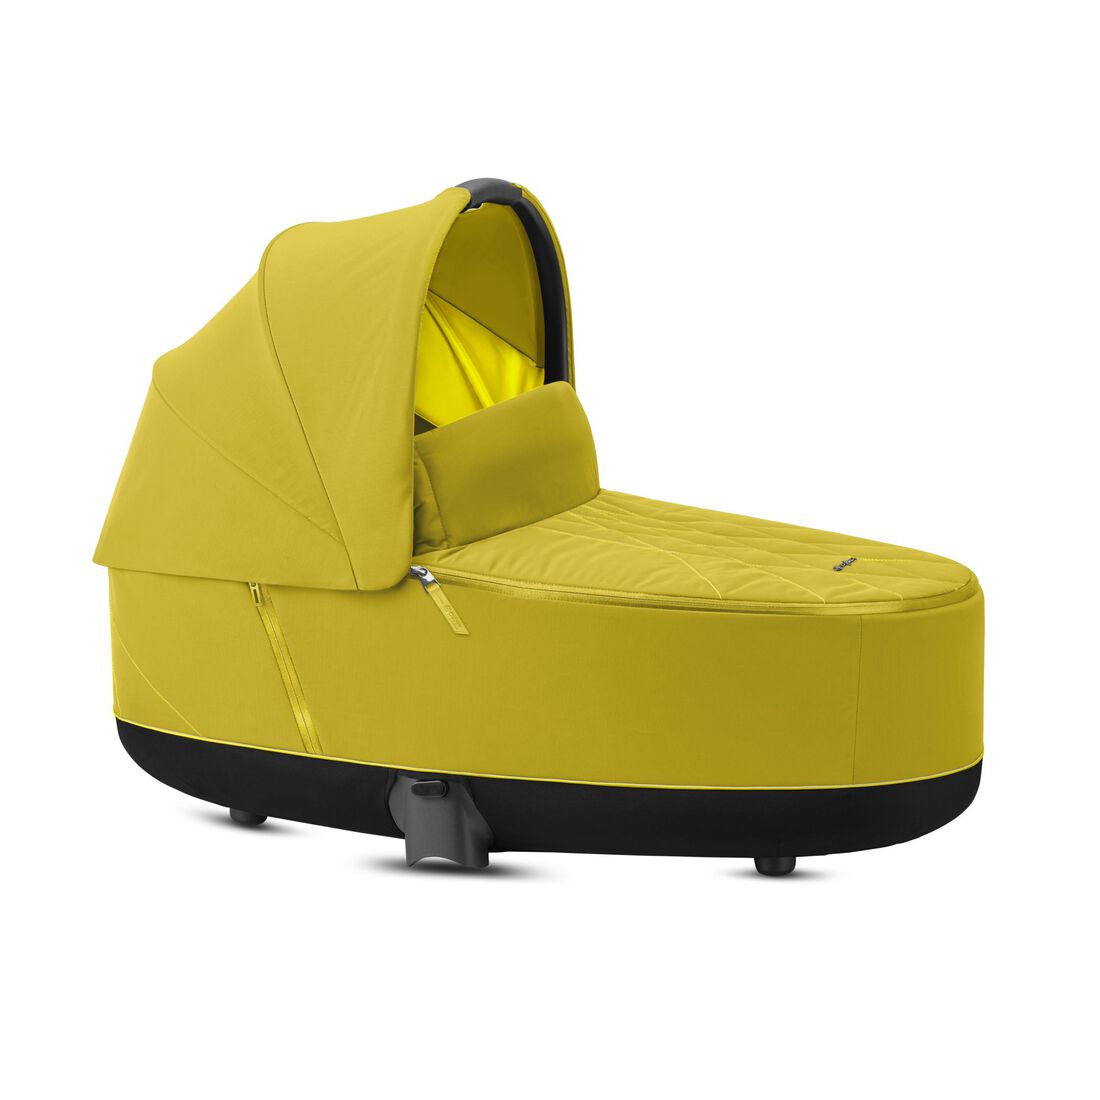 CYBEX Priam 3 Lux Carry Cot - Mustard Yellow in Mustard Yellow large image number 1